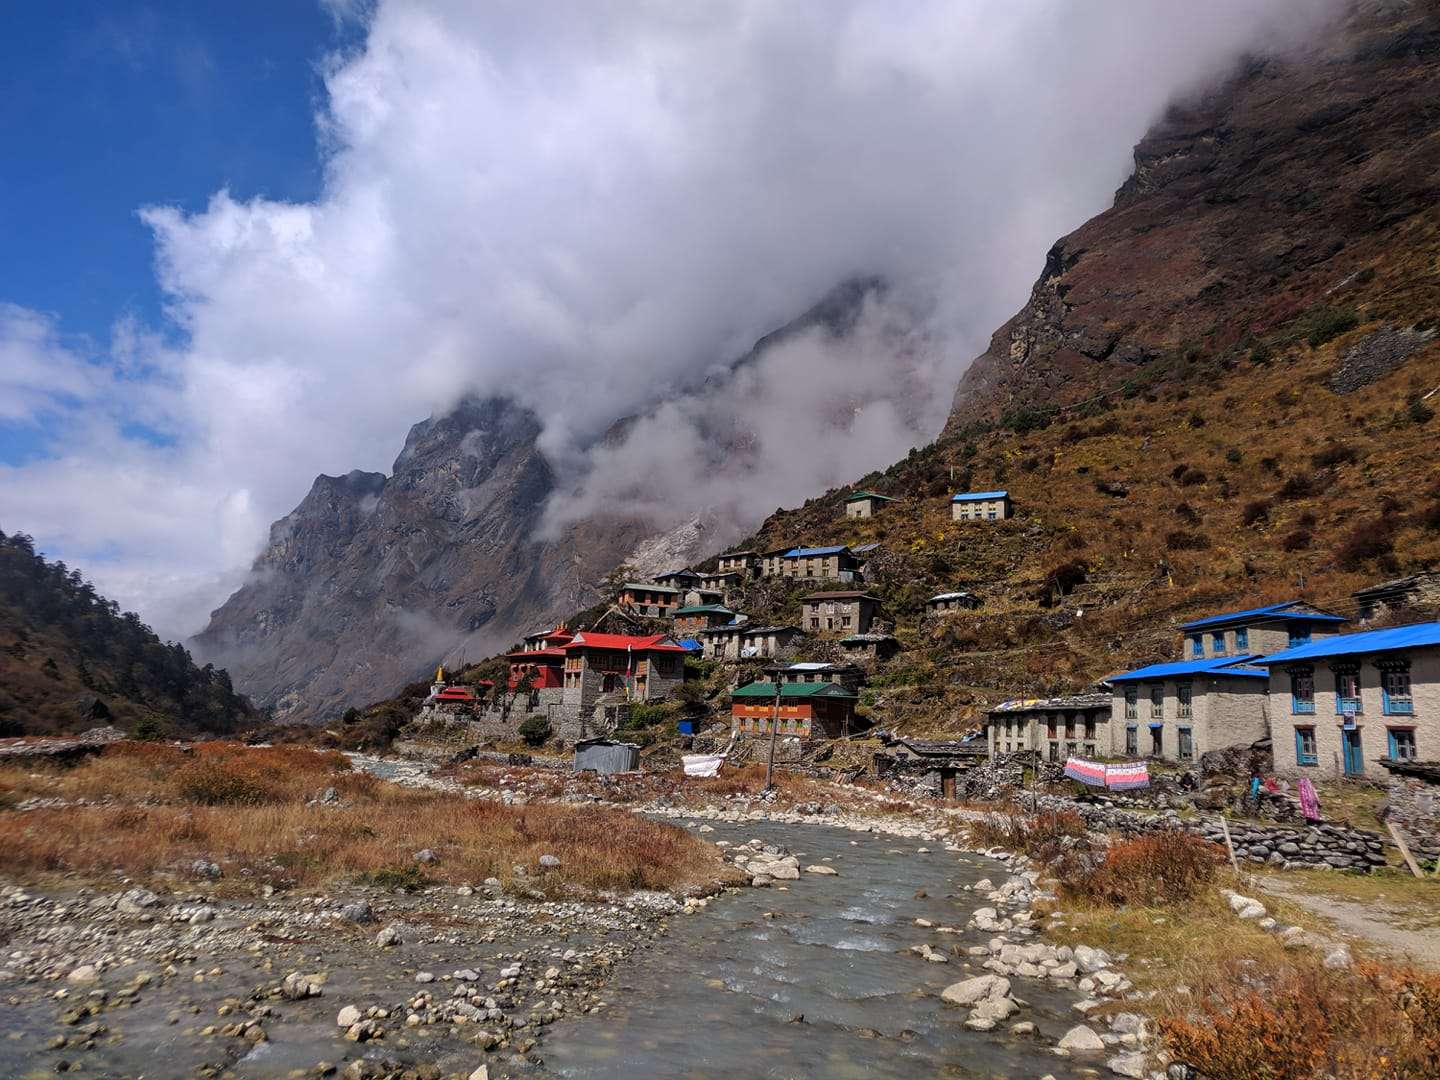 Kelthang Kharka to Beding (3690M) / 6hrs walk / Overnight at mountain lodge or tented camp'